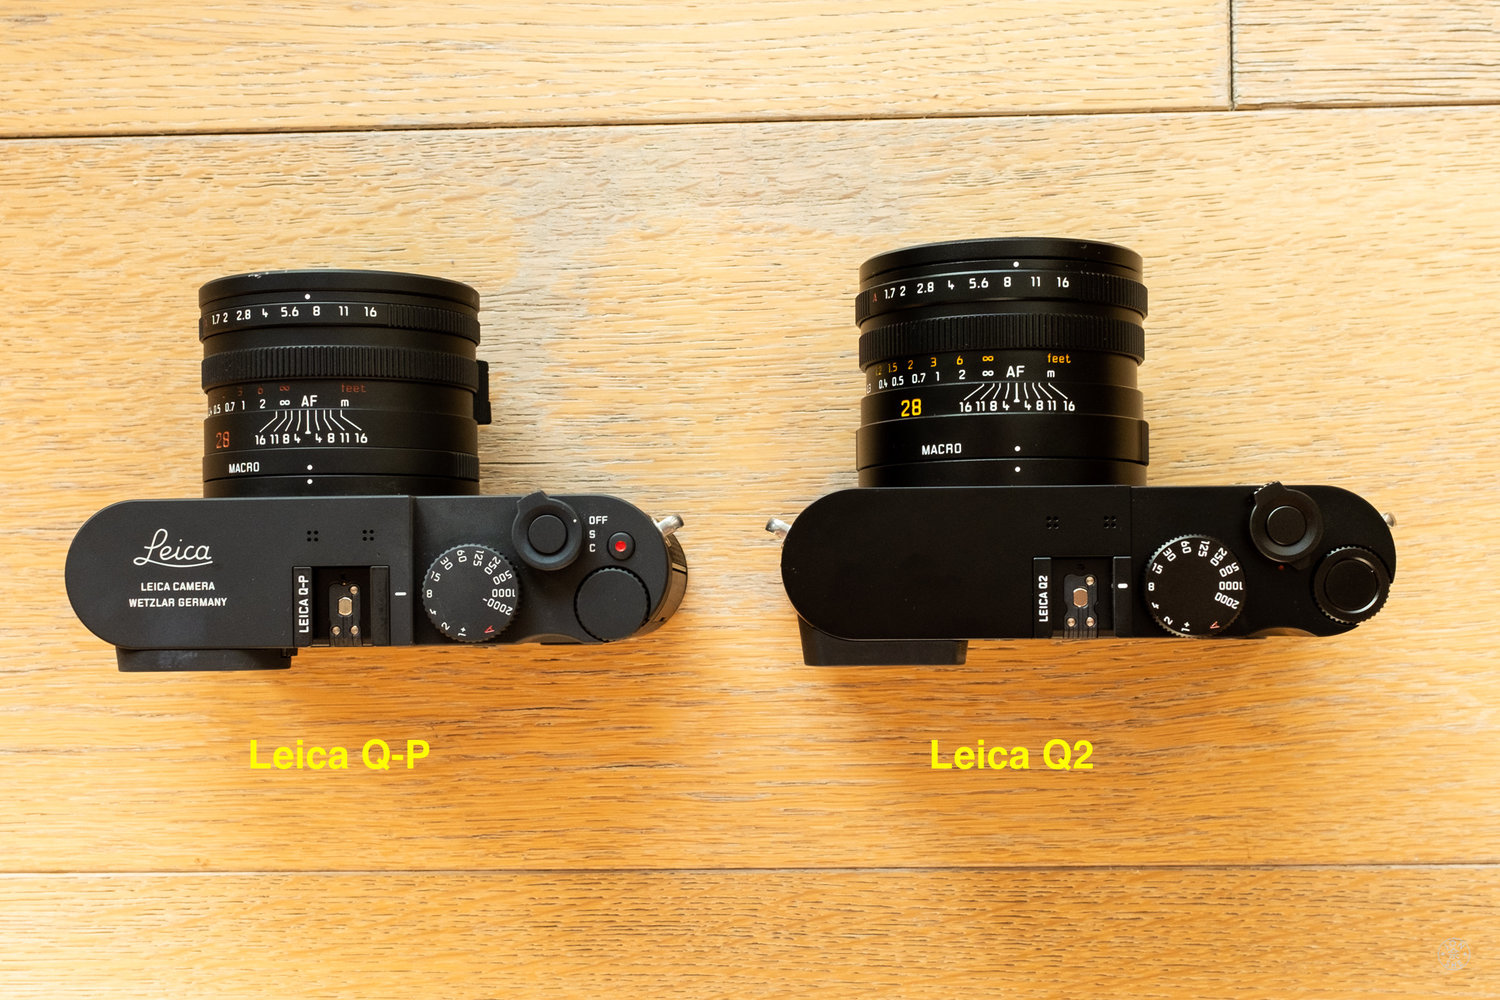 Additional Leica Q2 camera pictures leaked online - Photo 